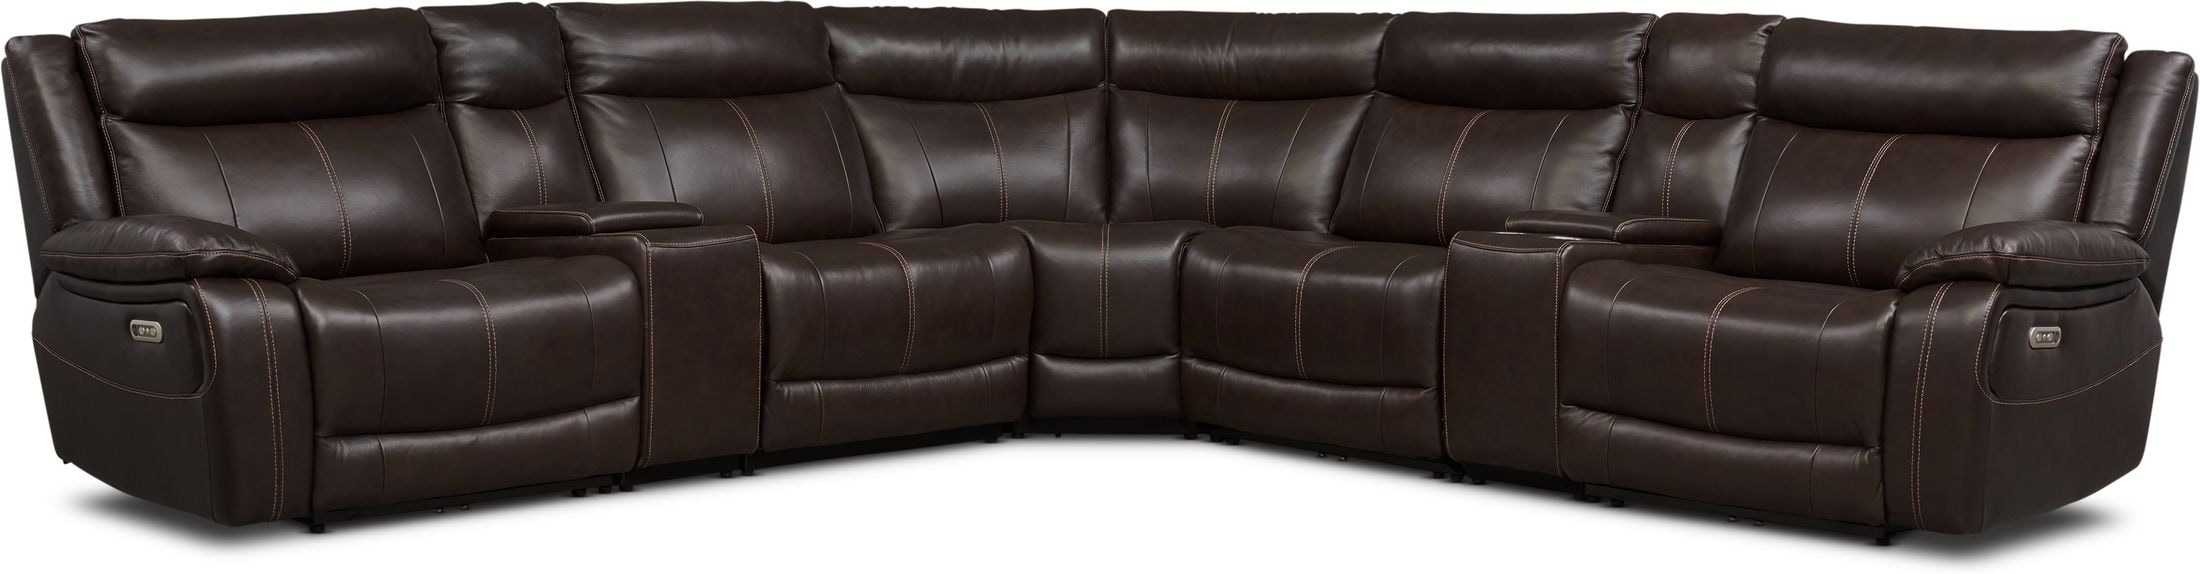 Vince 7 Piece Dual Power Reclining, Danvors 7 Pc Leather Sectional Sofa